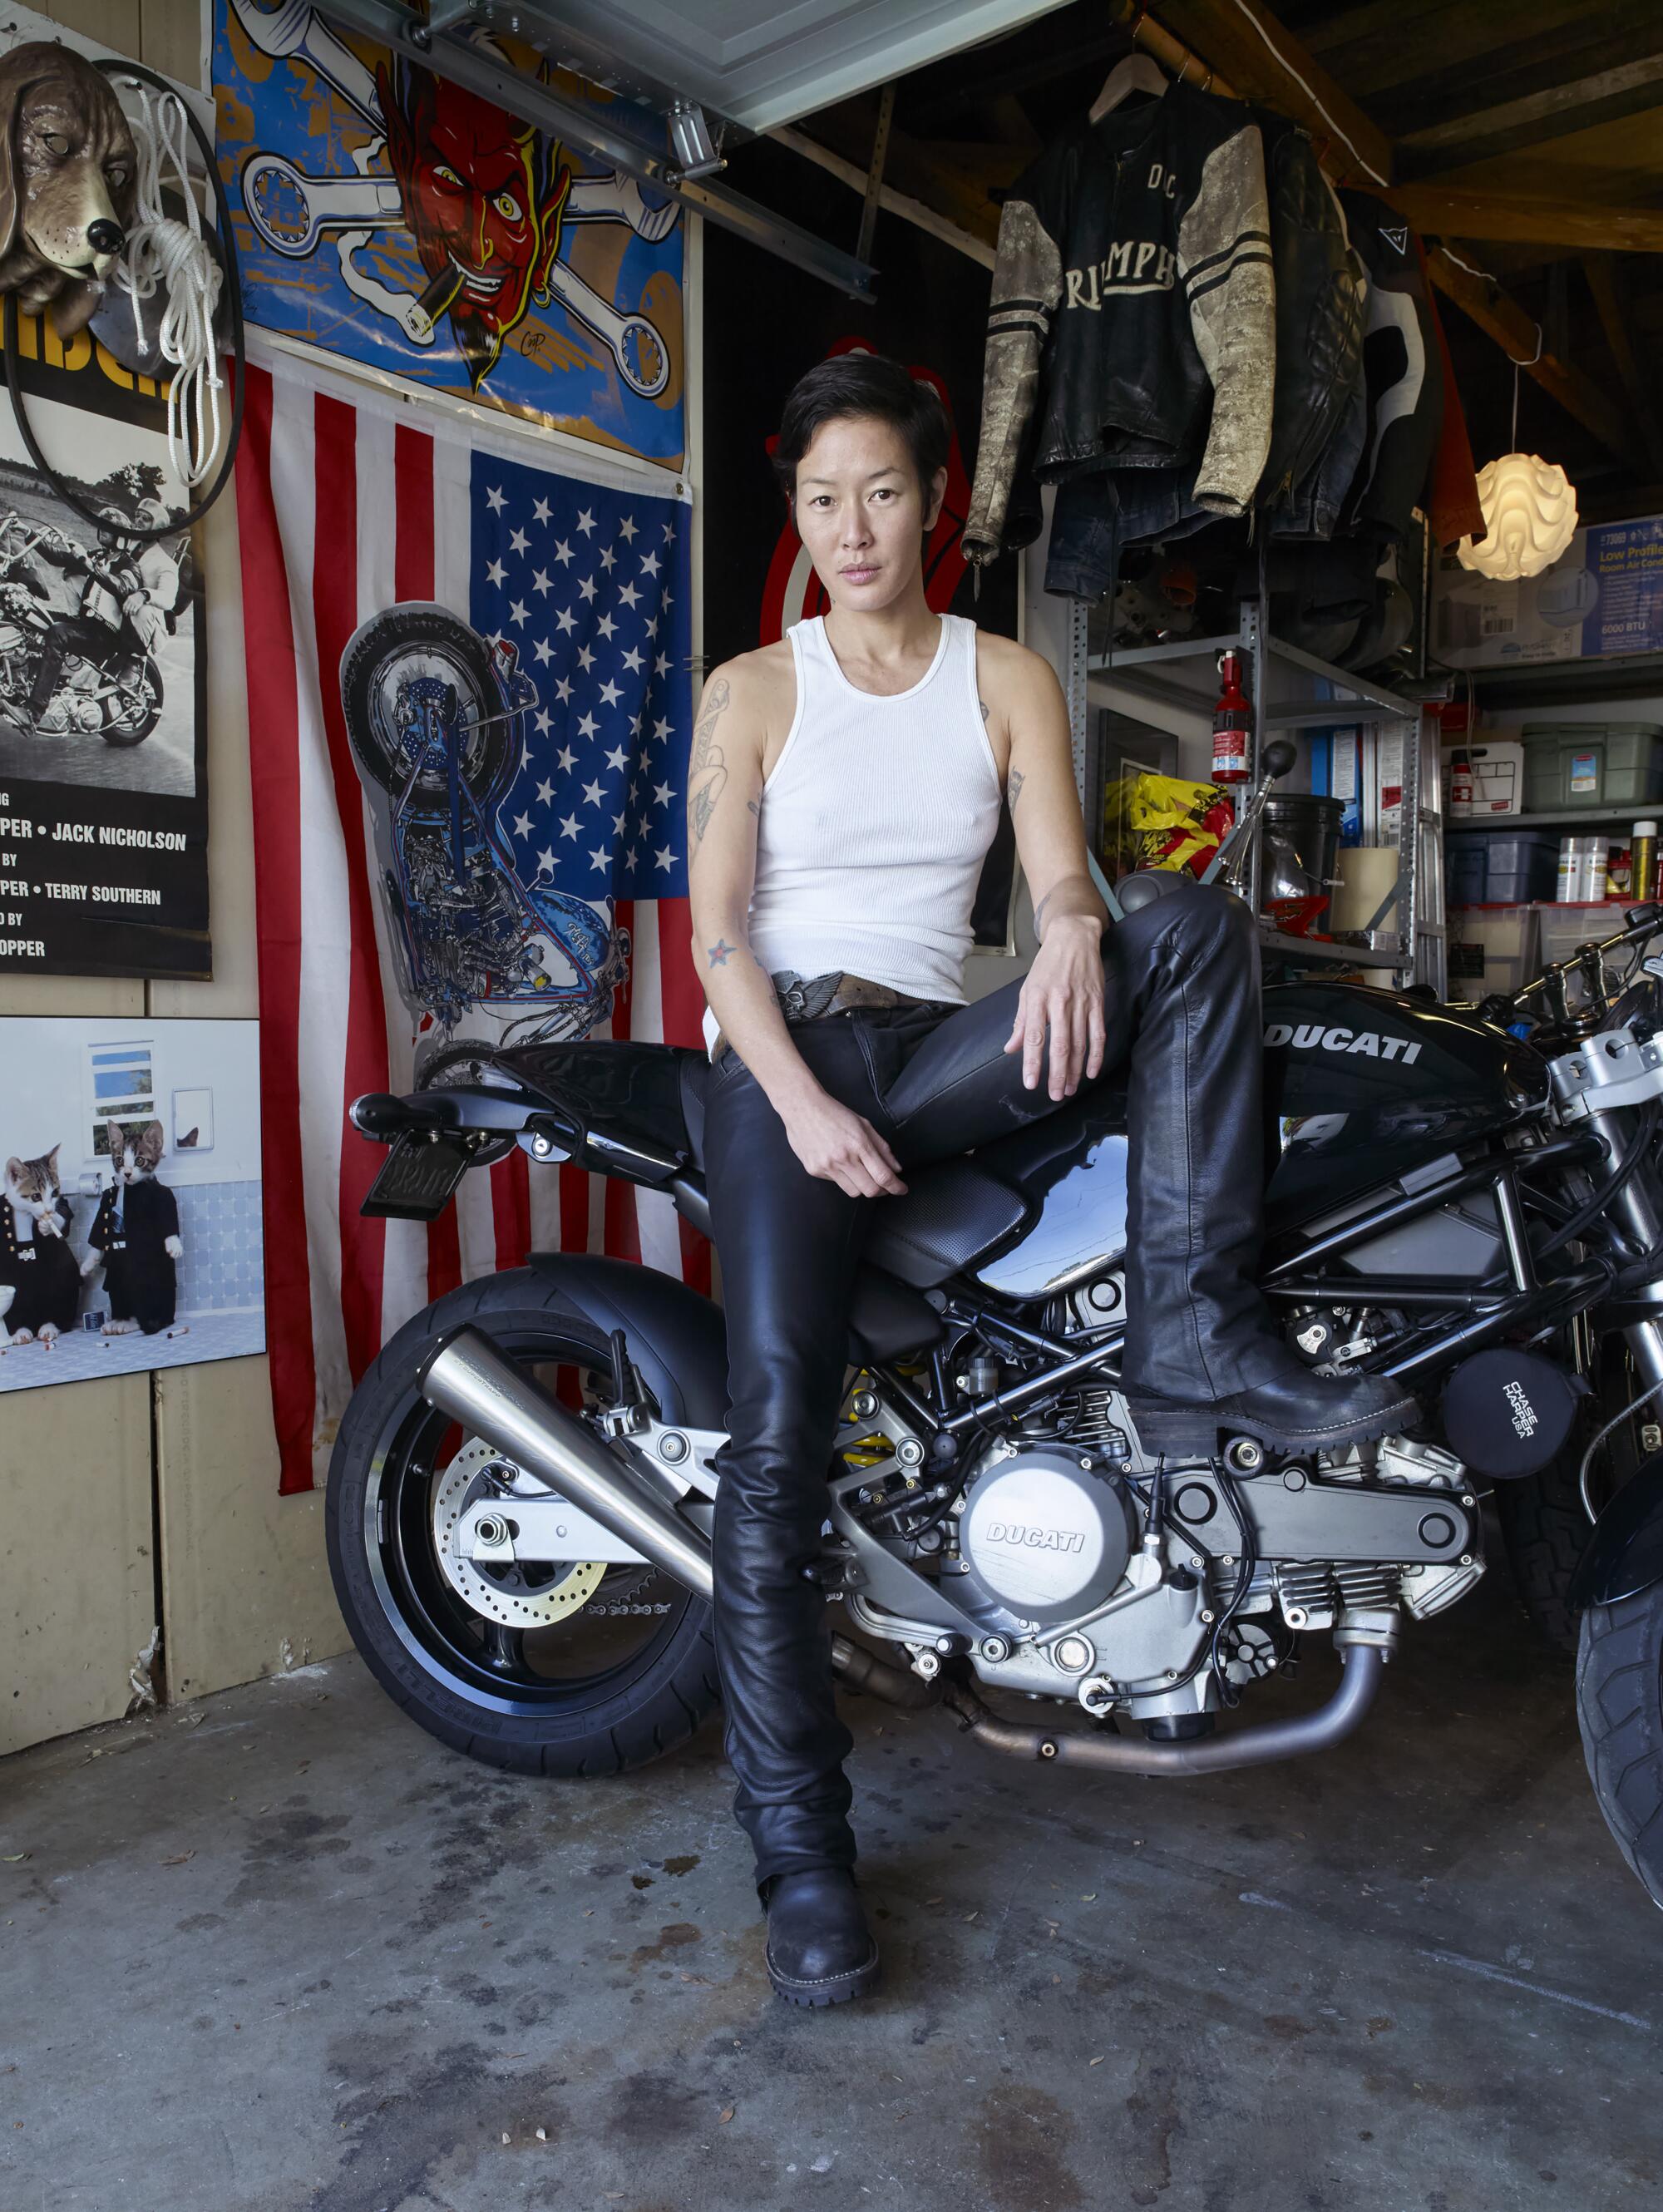 Image titled "Jenny Shimizu" shows a young woman wearing a tank top and jeans sitting on her motorcycle in a garage